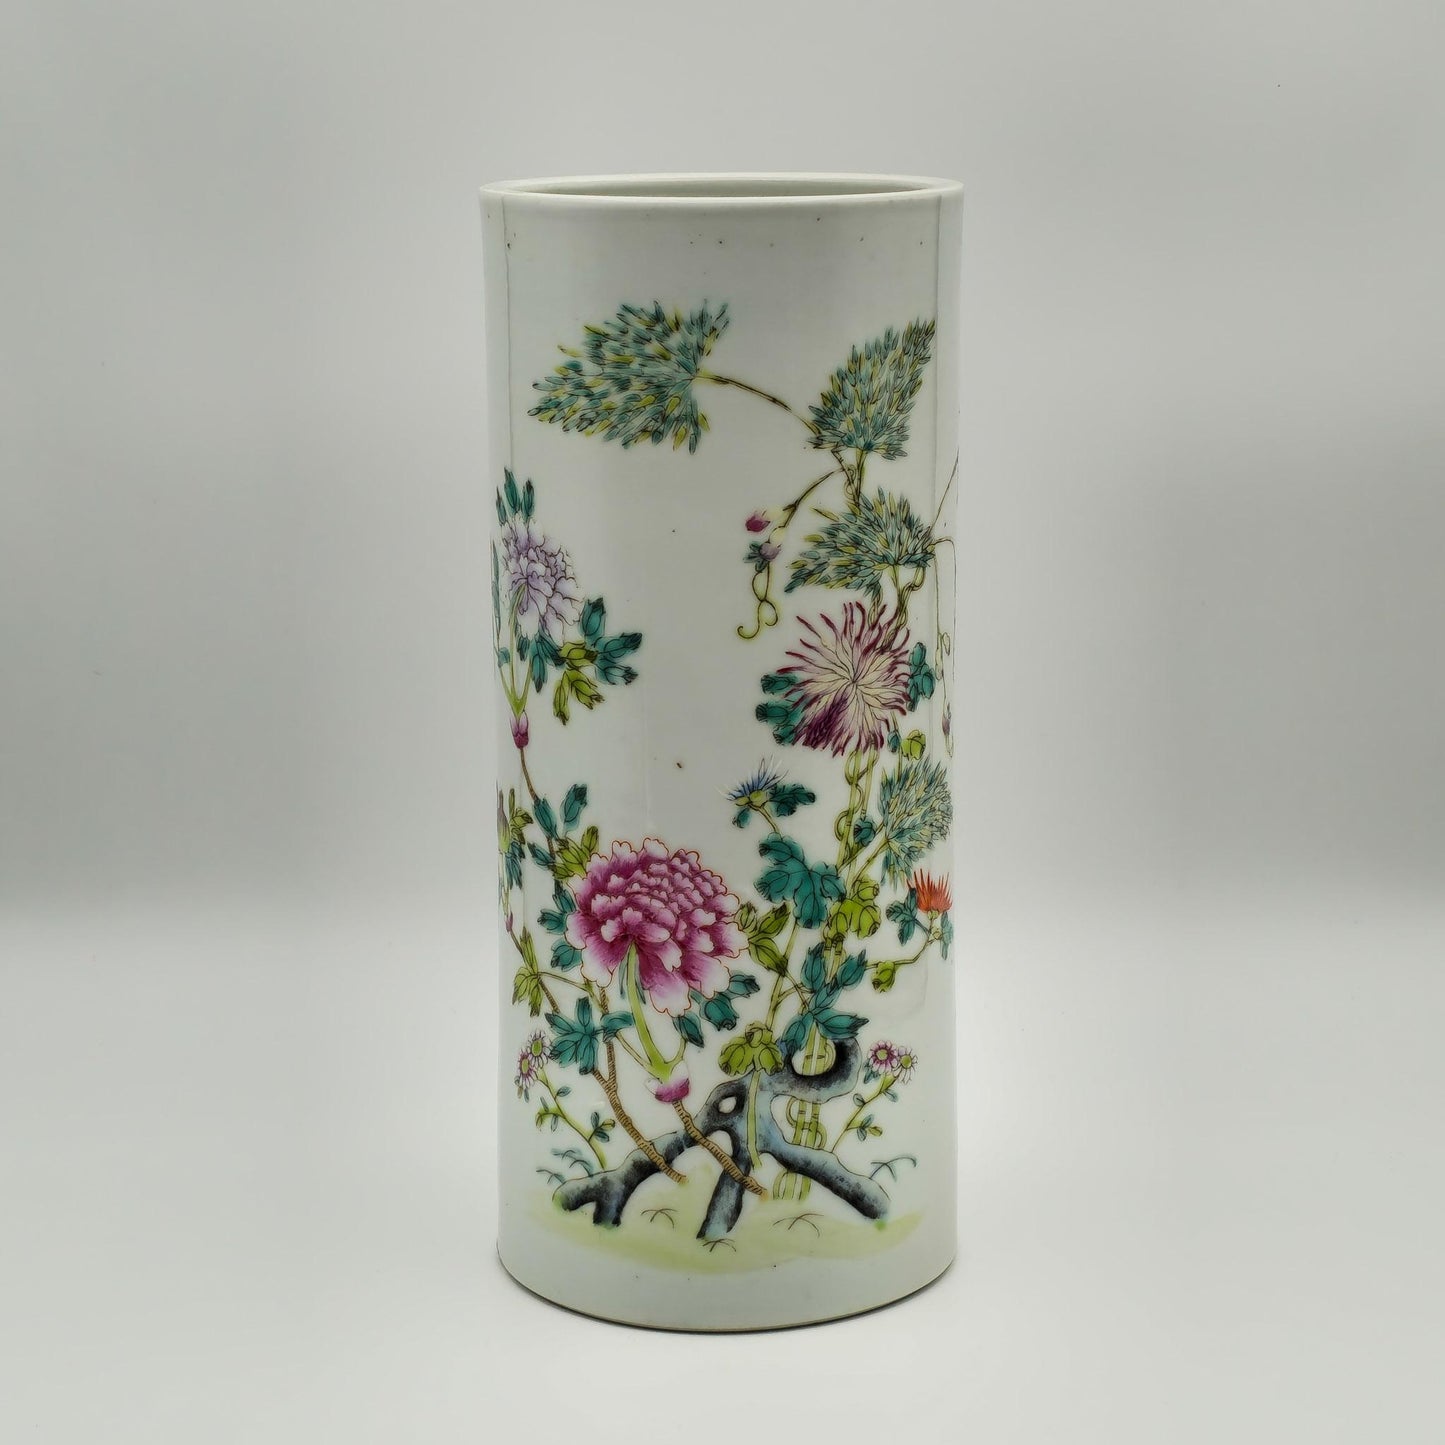 Chinese 20thC. Famille Rose Hongxian Marked Sleeve Vase With Flowers and Bats, Republic Period